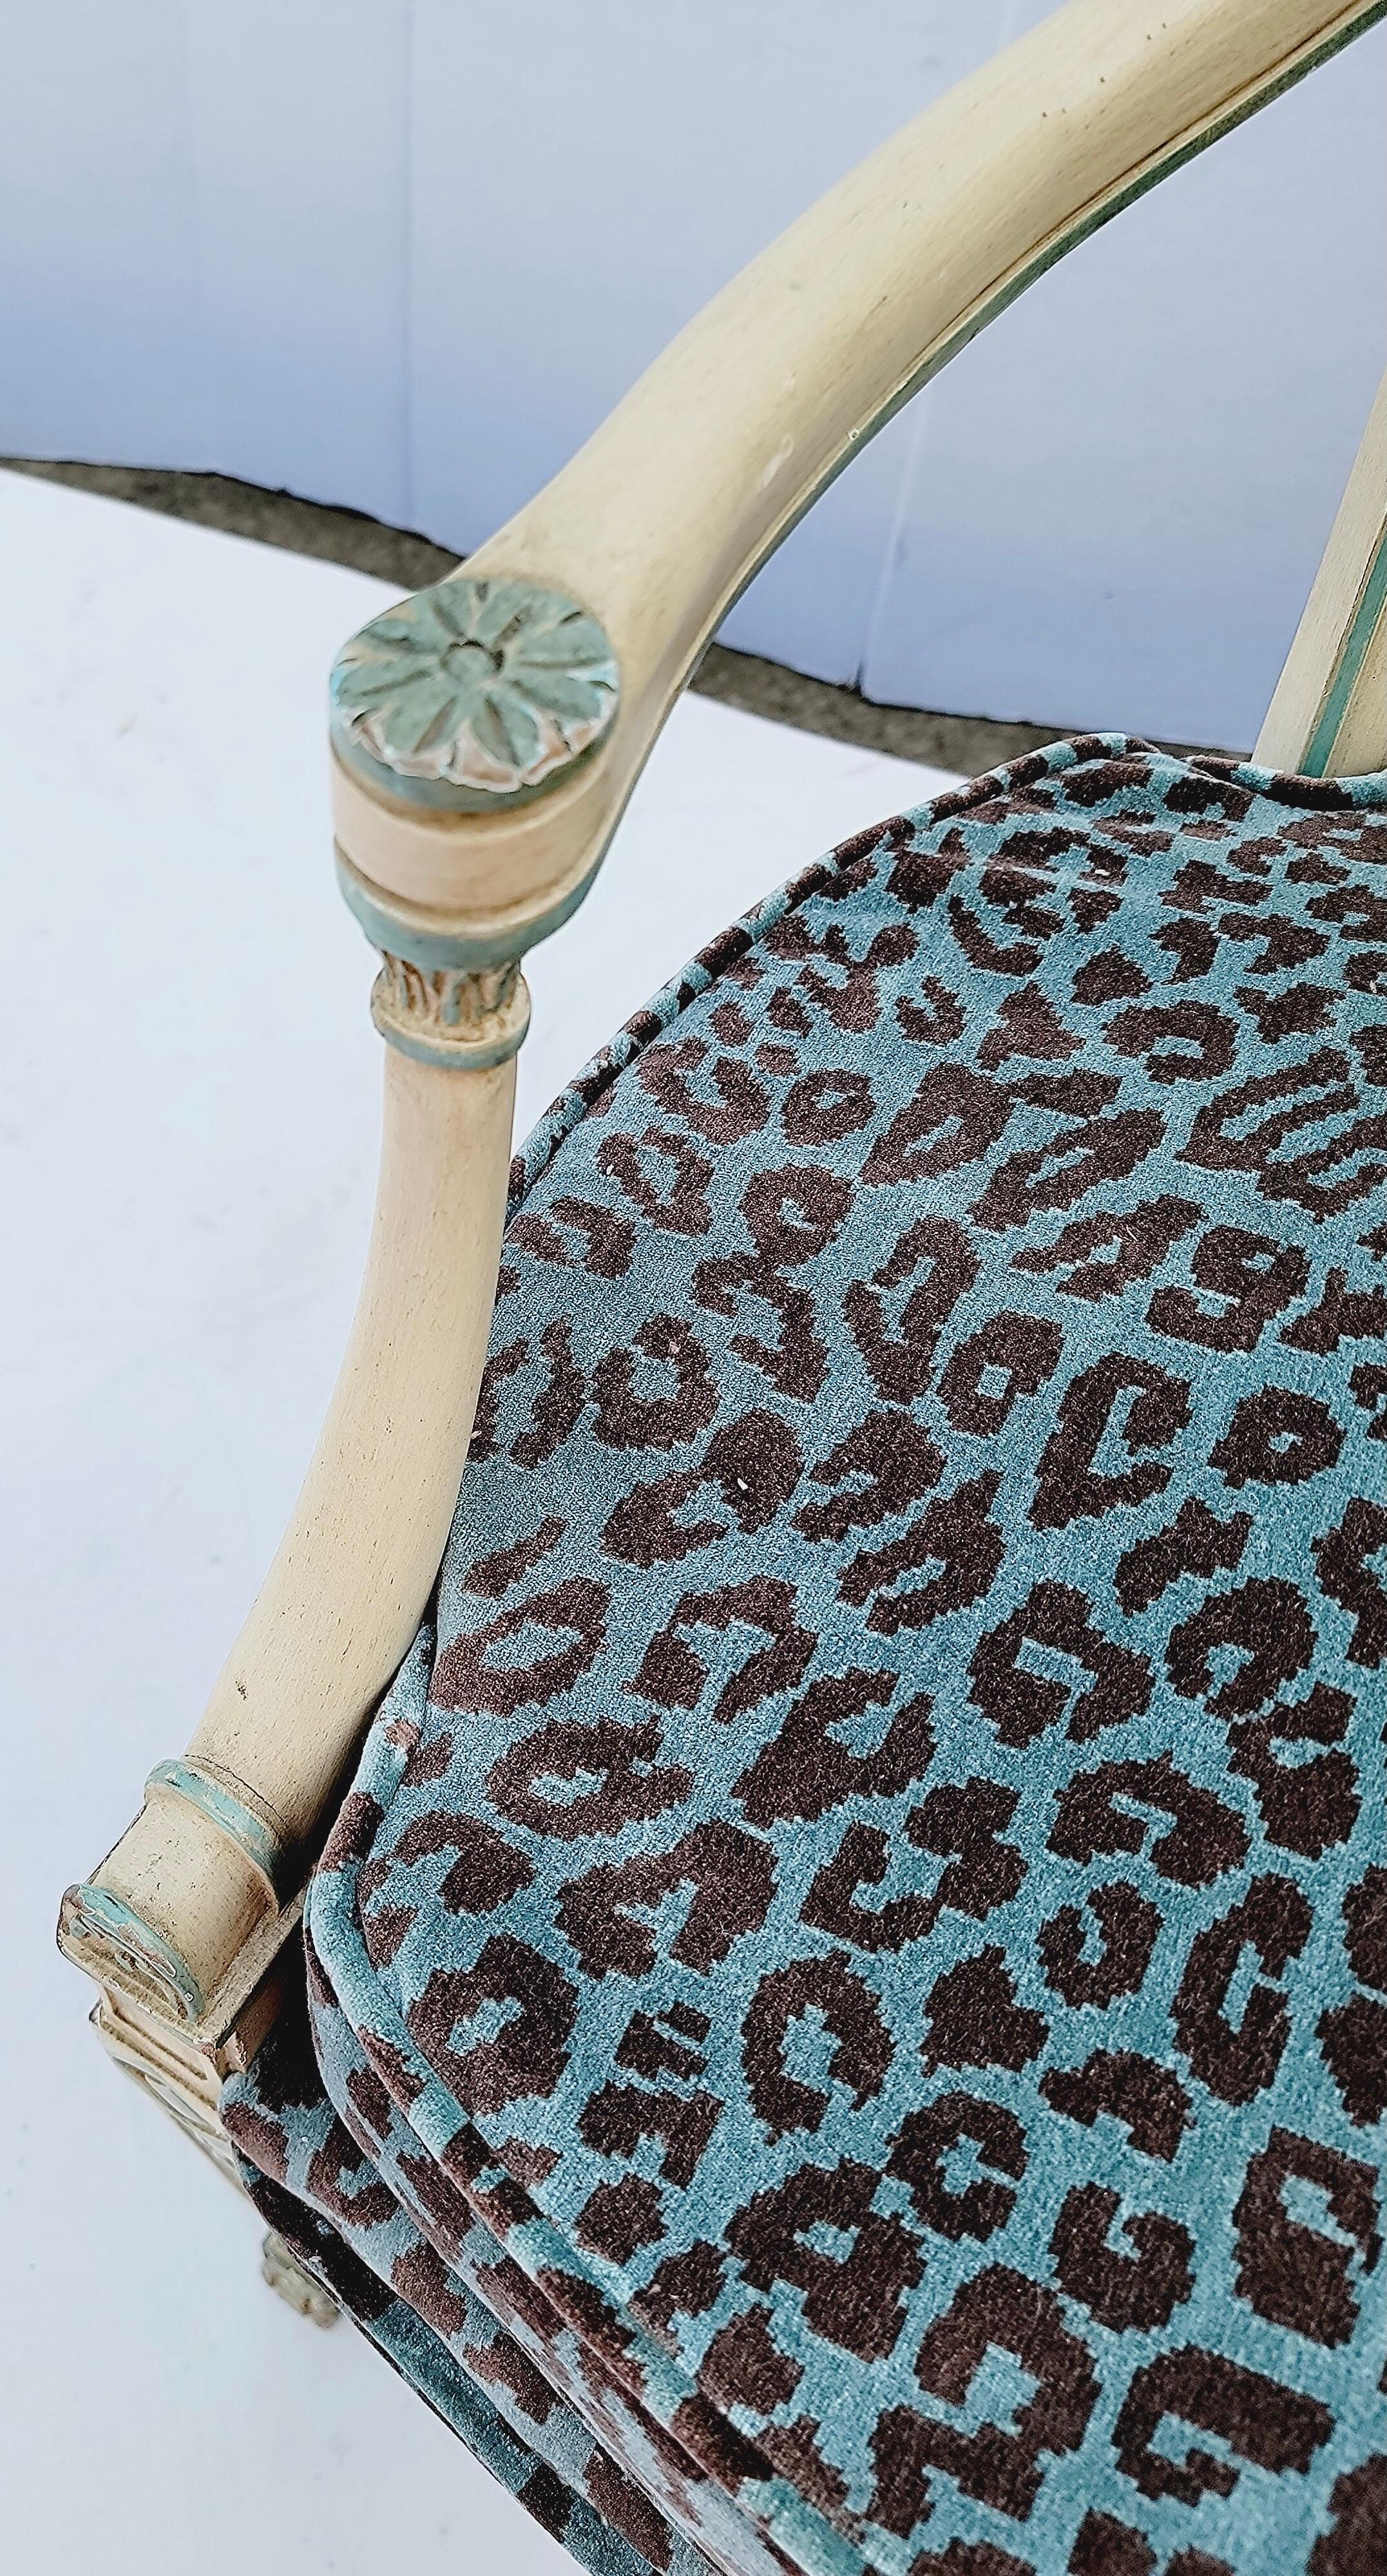 This is a Italian neoclassical style carved bergère chair. The frame is painted ivory with turquoise contrasting color. The leopard velvet is recent.